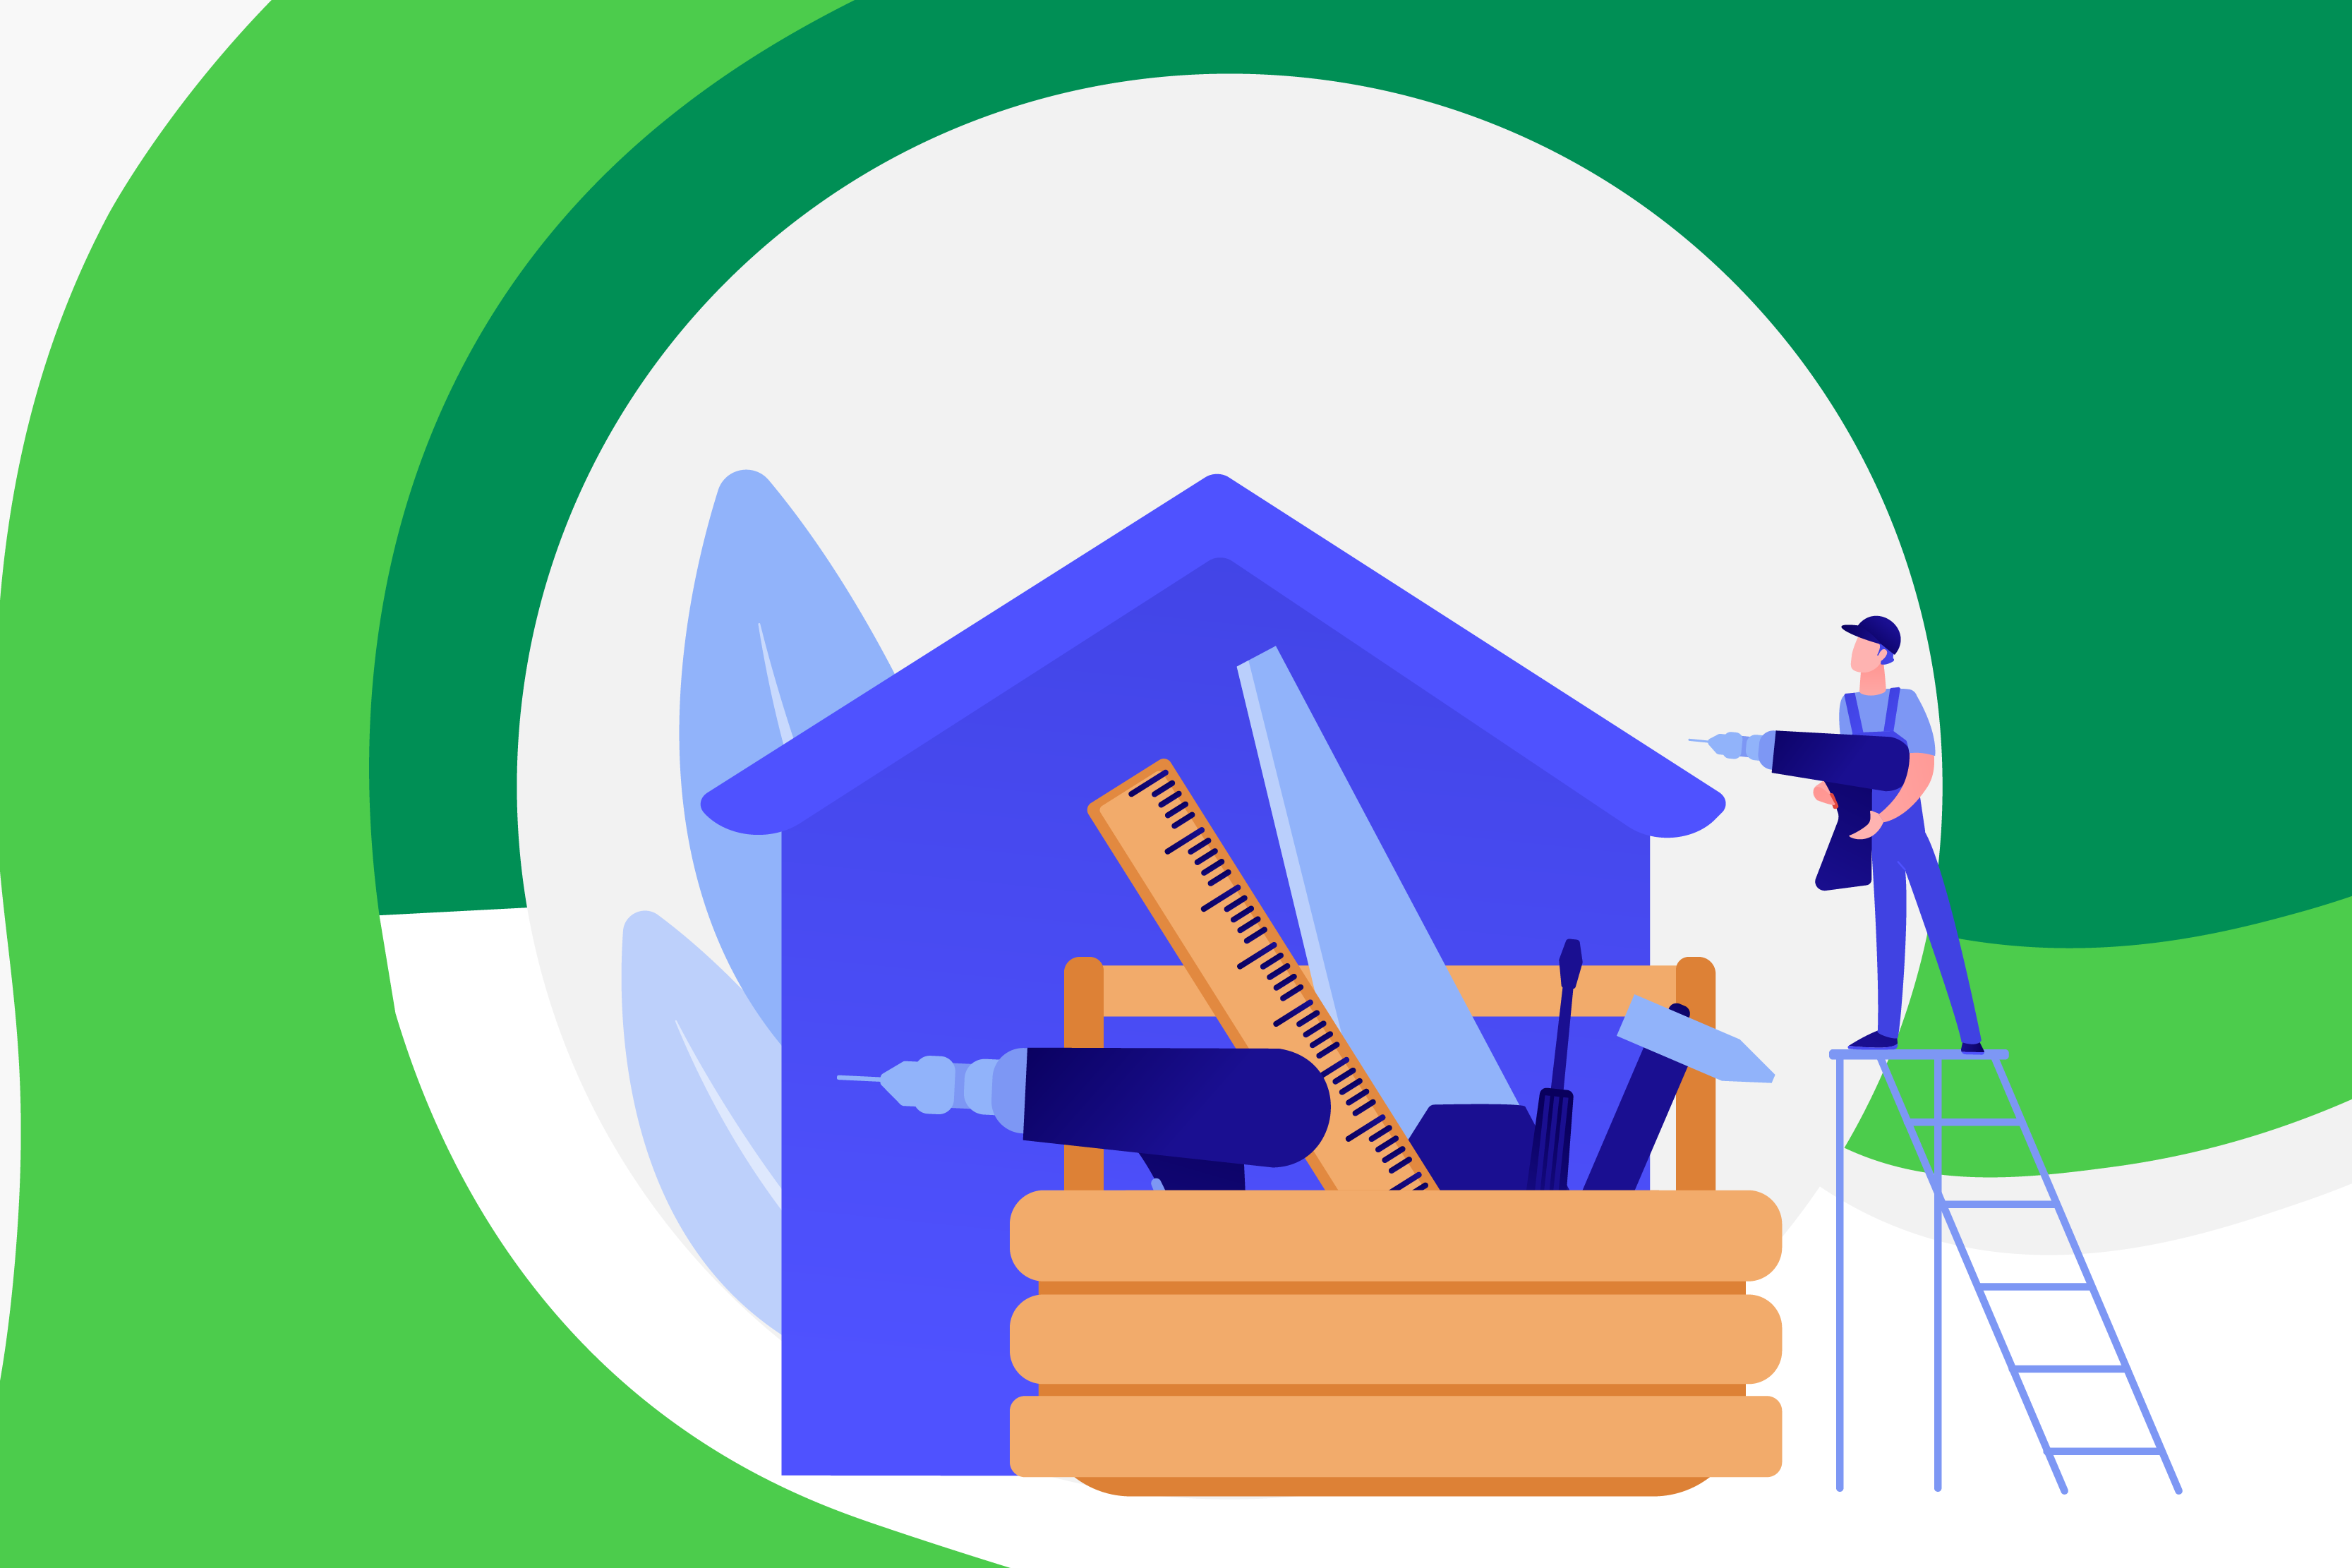 Illustration for the chapter Core Materials, blue collar worker with massive tools building a house